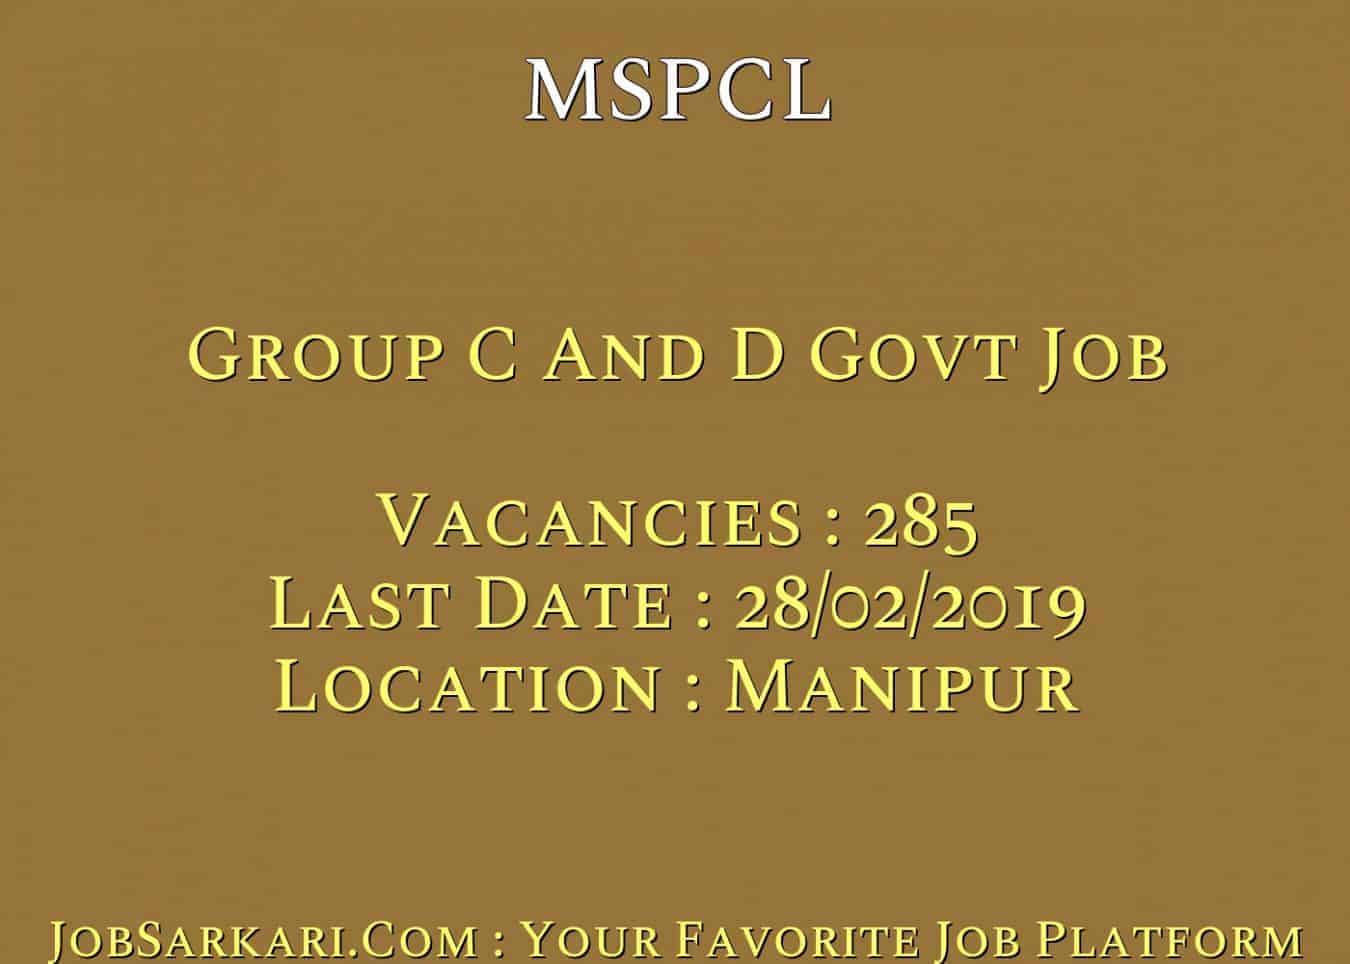 MSPCL Recrutment 2019 For Group C And D Govt Job